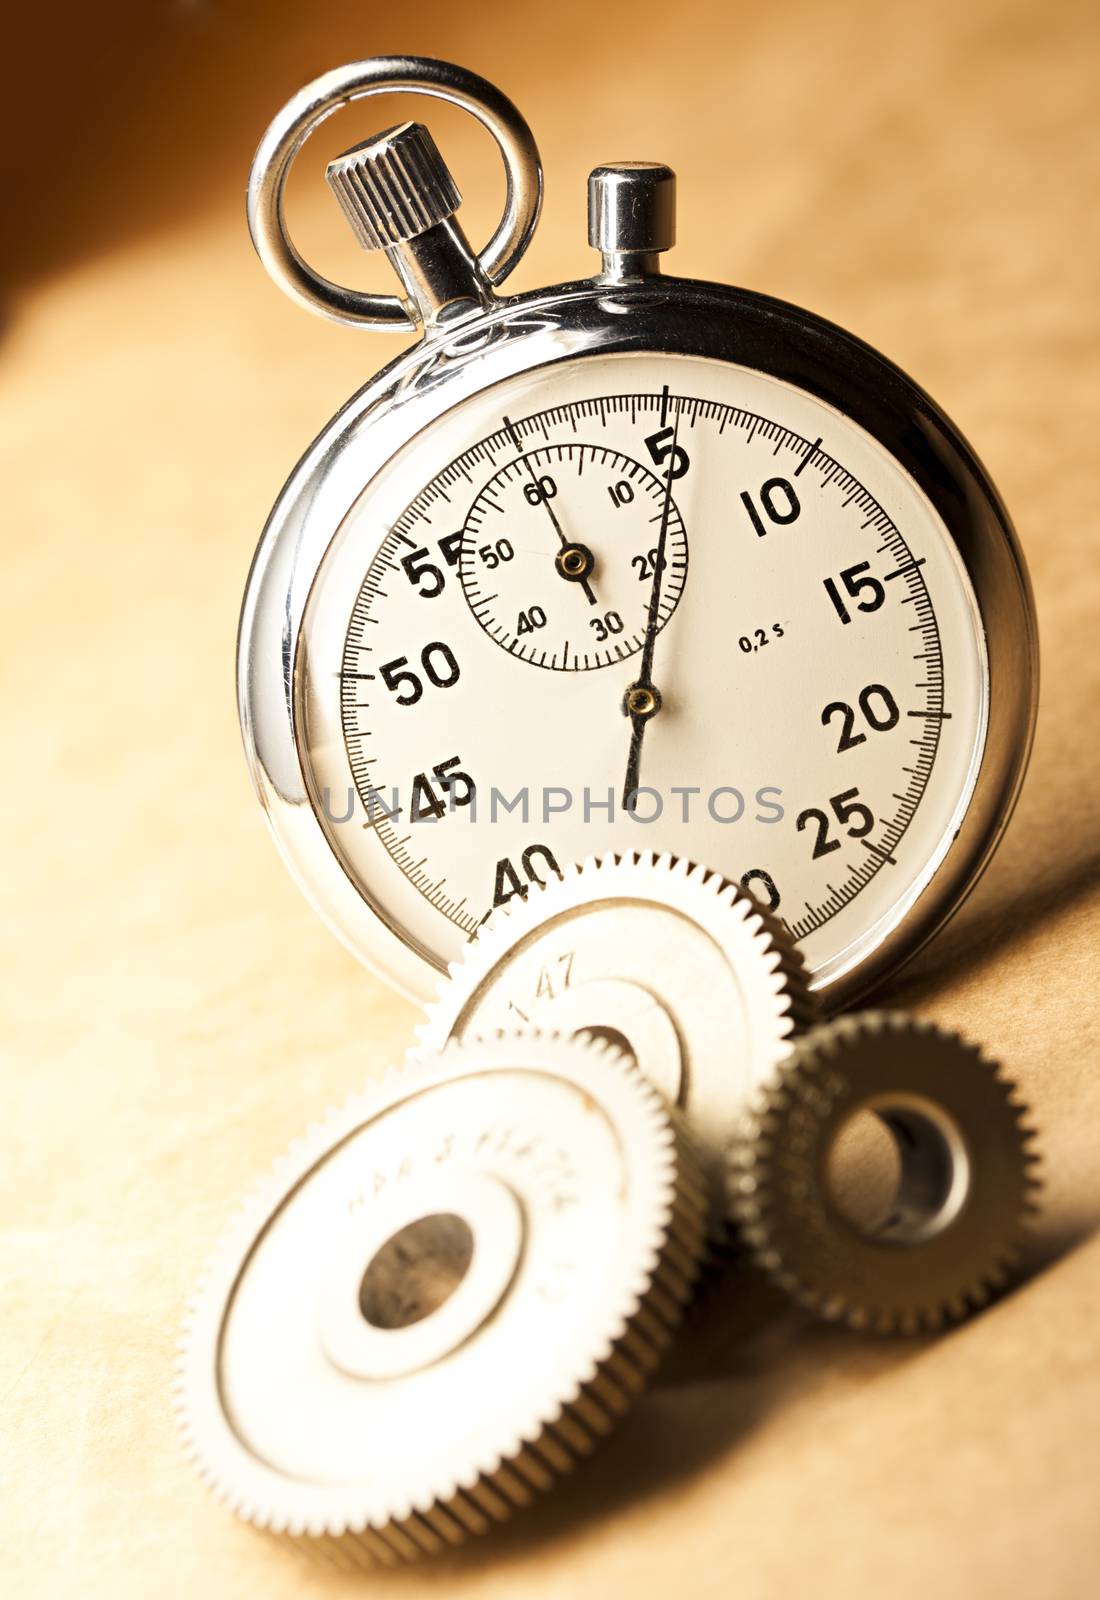 Mechanical ratchets and stopwatch